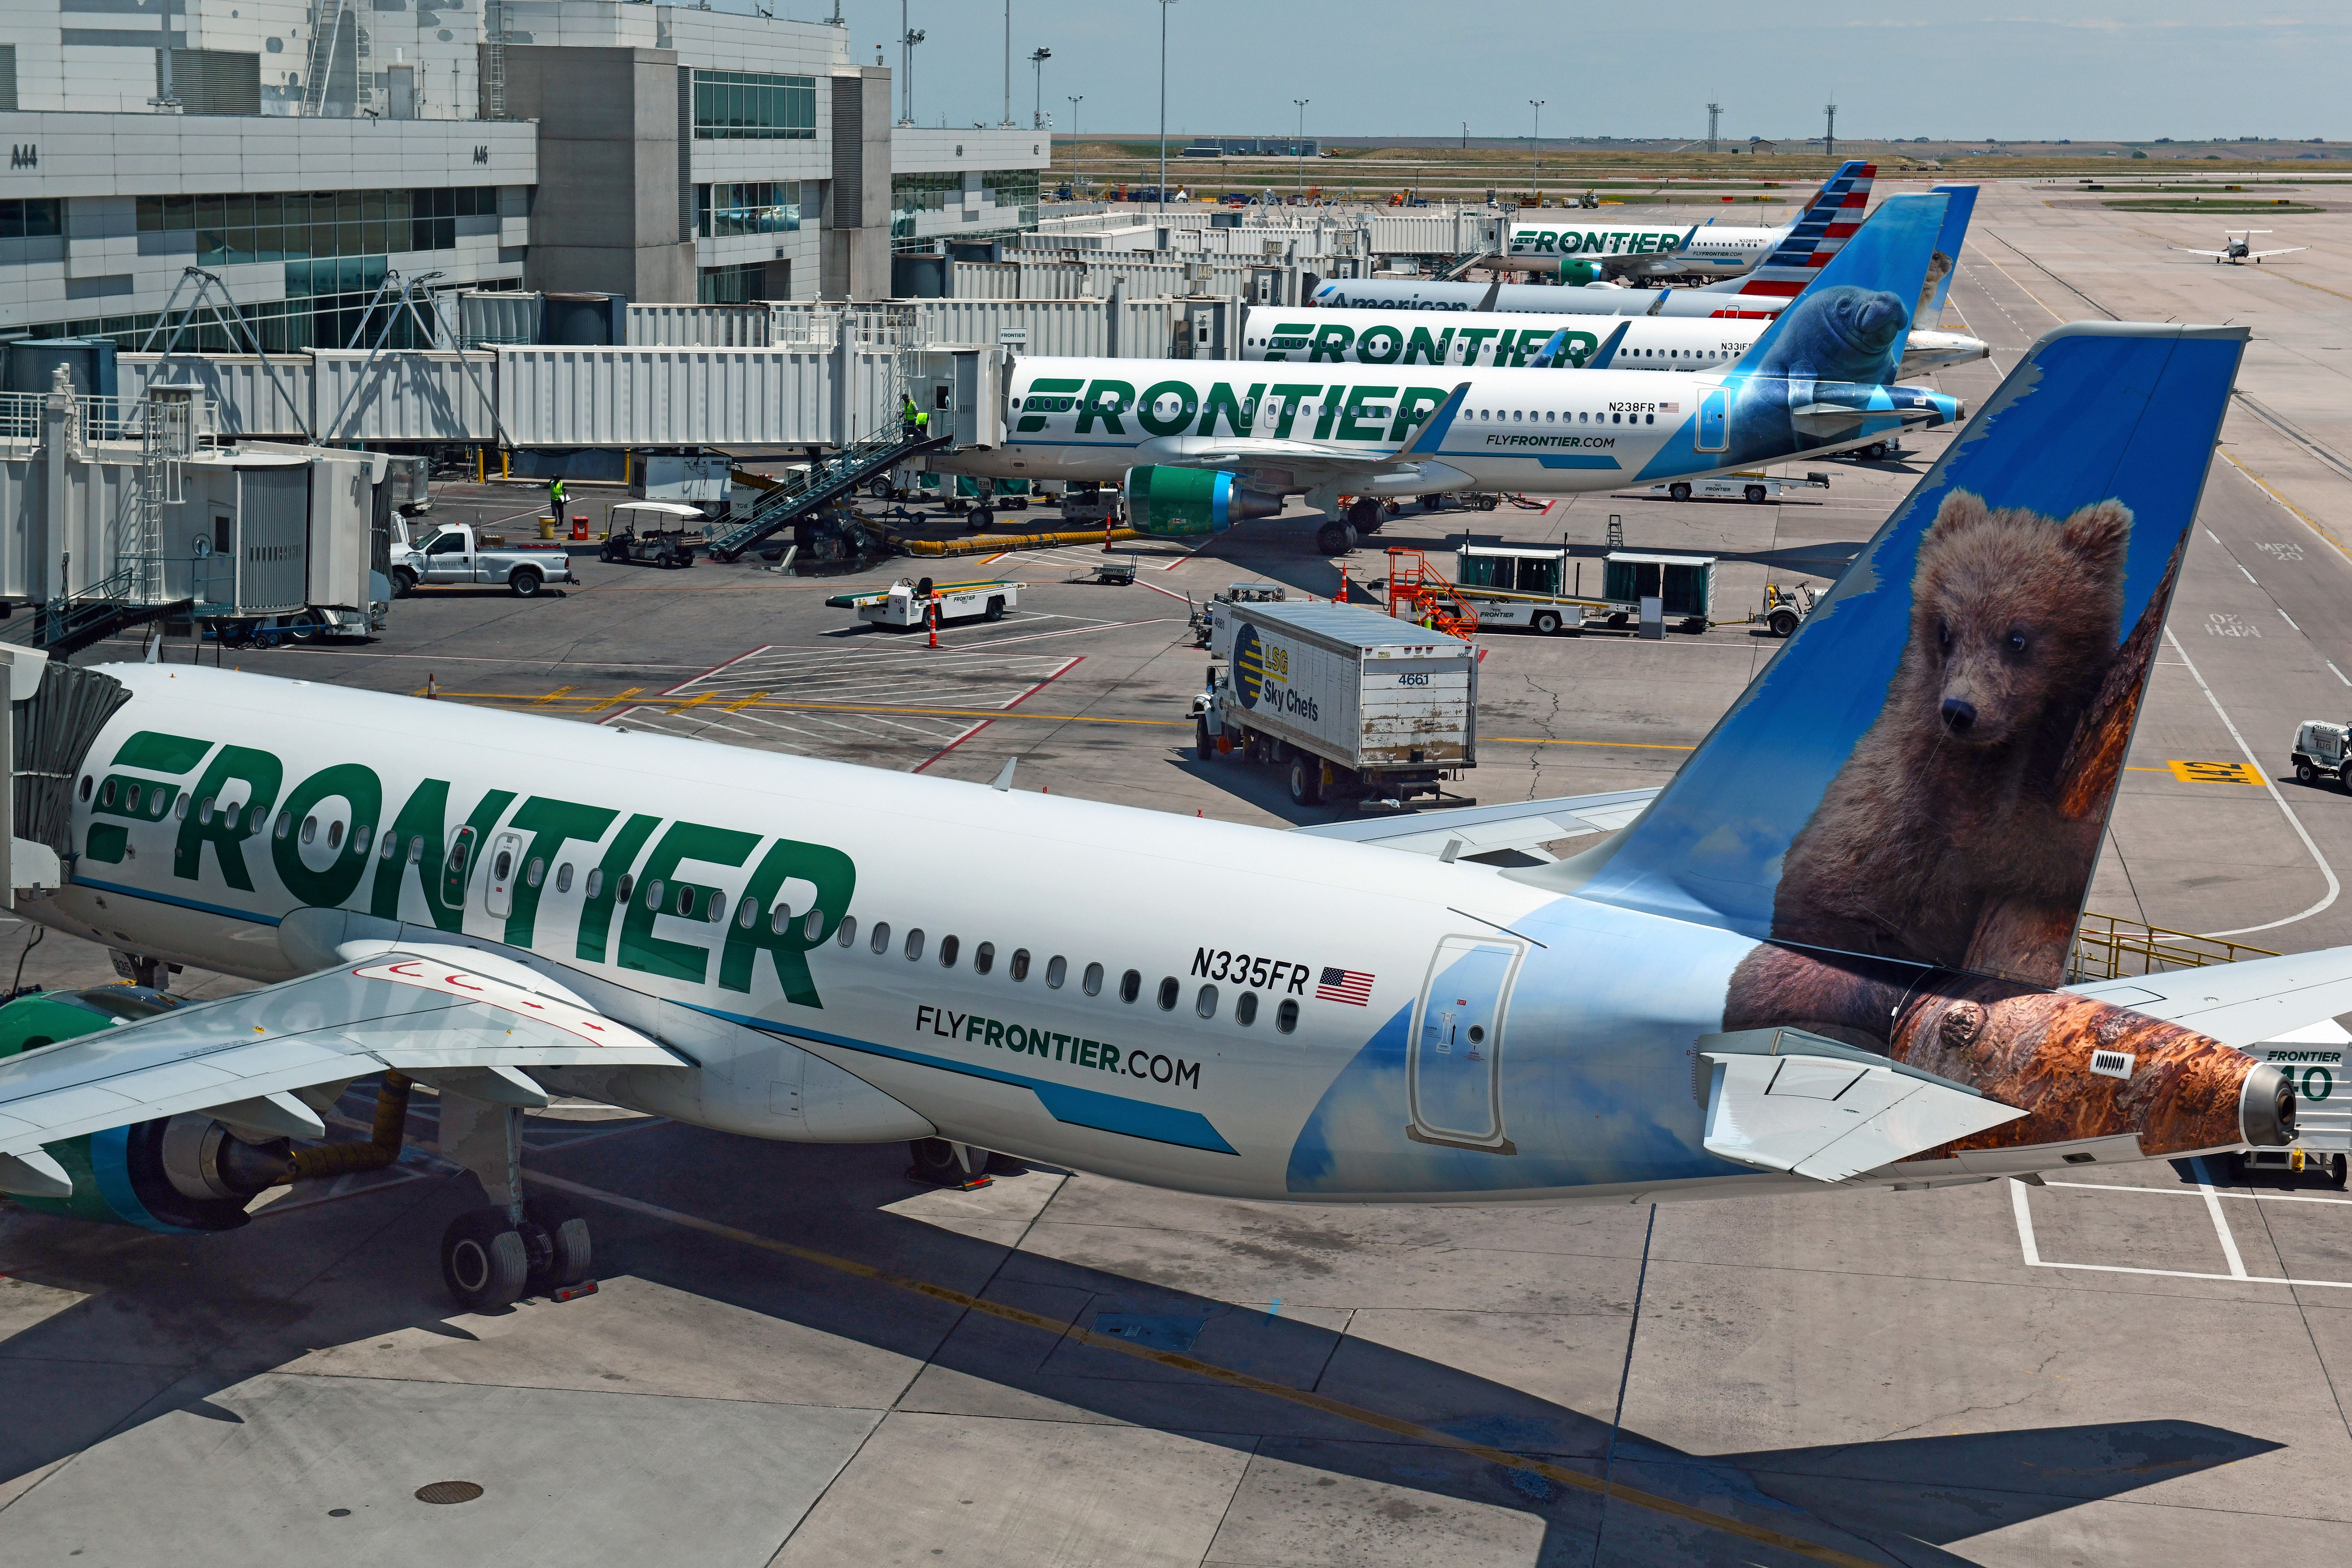 Several Frontier Airlines aircraft parked